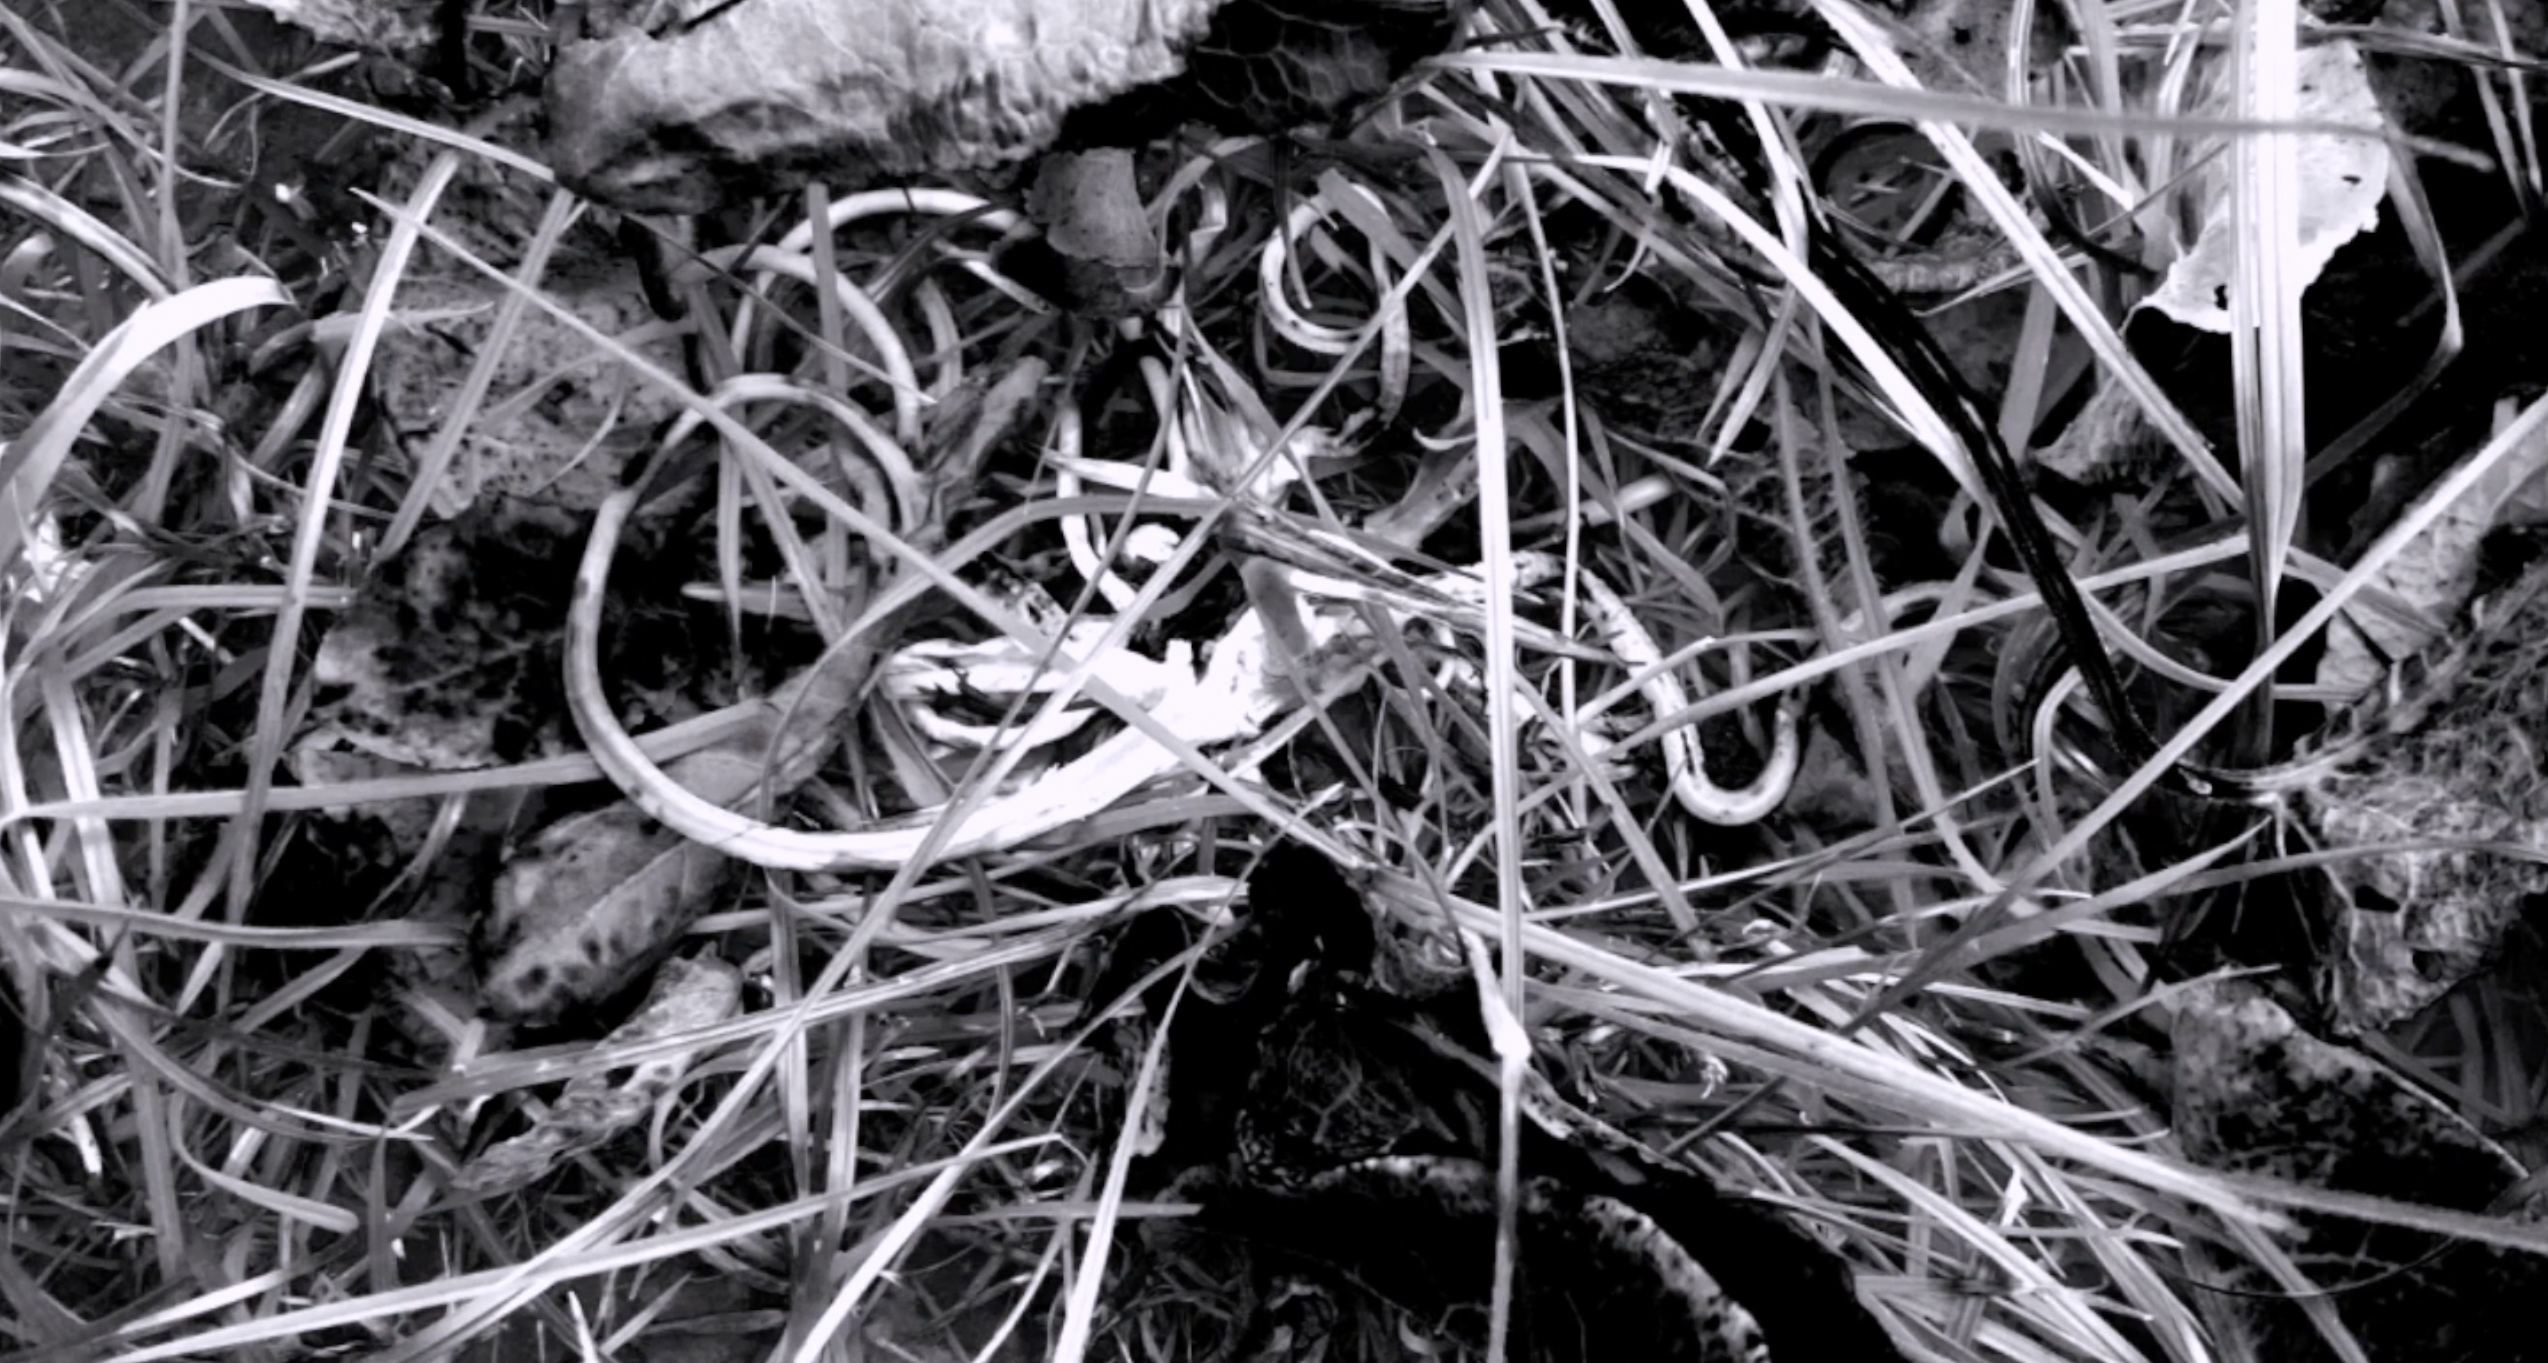 A close up photo of leaves and twigs in black and white